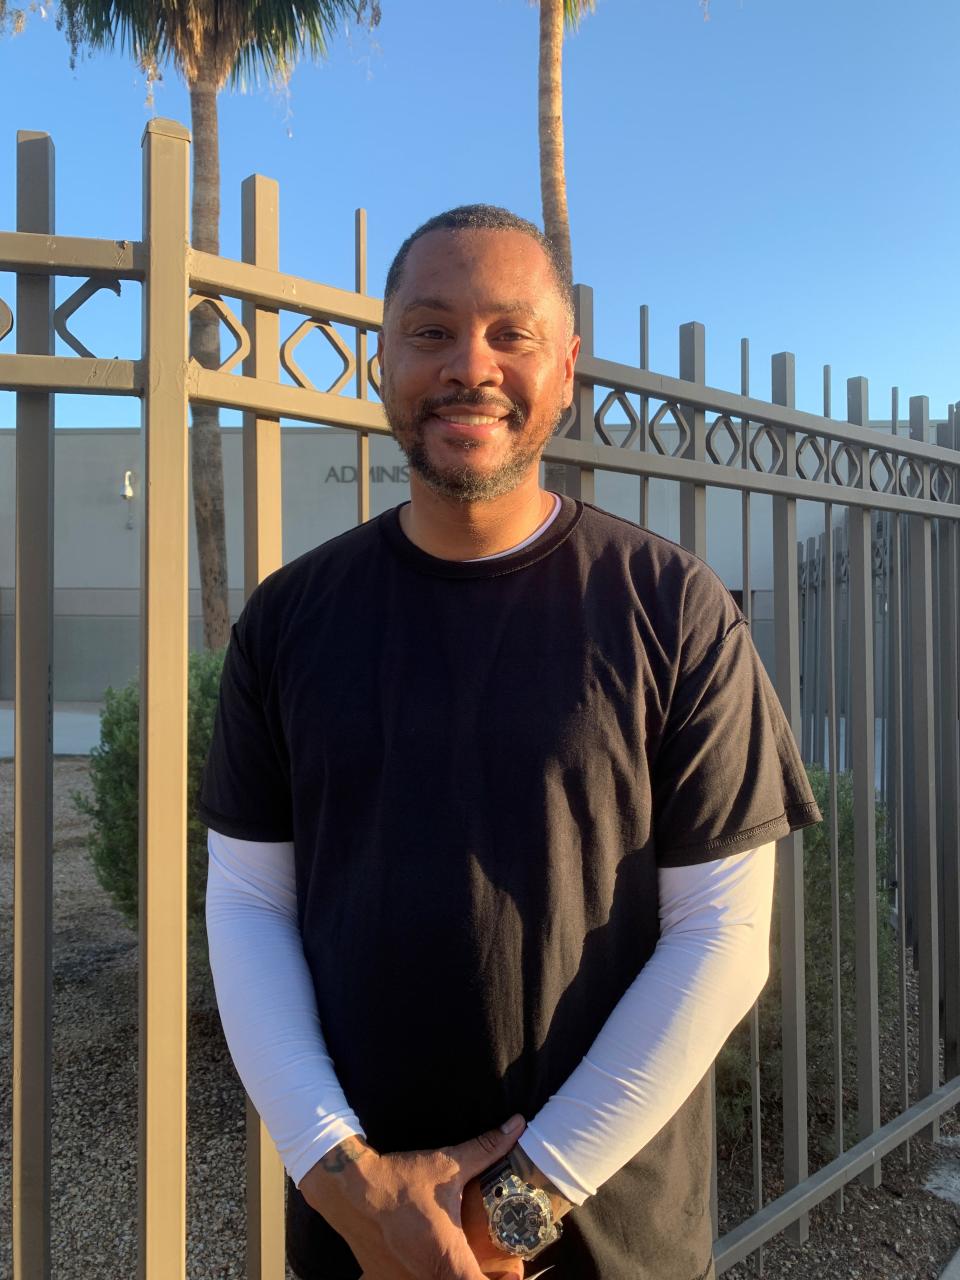 Tempe resident Jerry McPherson, 41, who works as the director of economic empowerment at Greater Phoenix Urban League was one of the first people to cast their votes at a South Phoenix polling place.